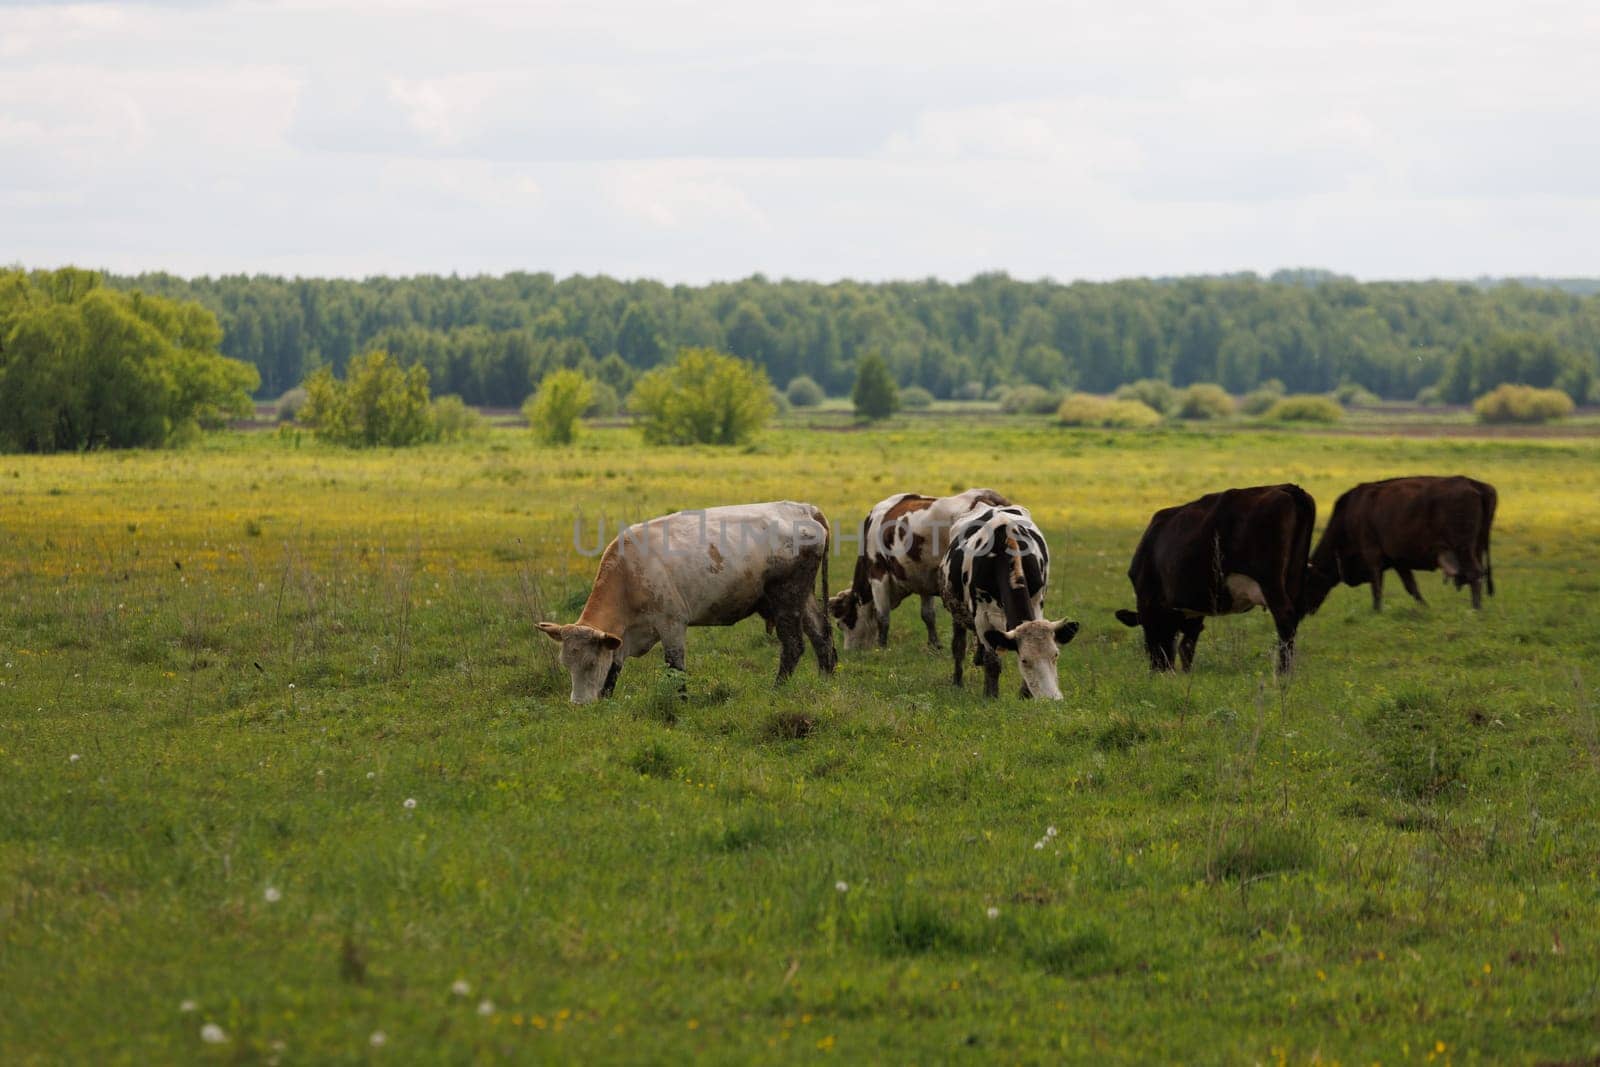 Cows grazing on grass in a natural grassland landscape by z1b